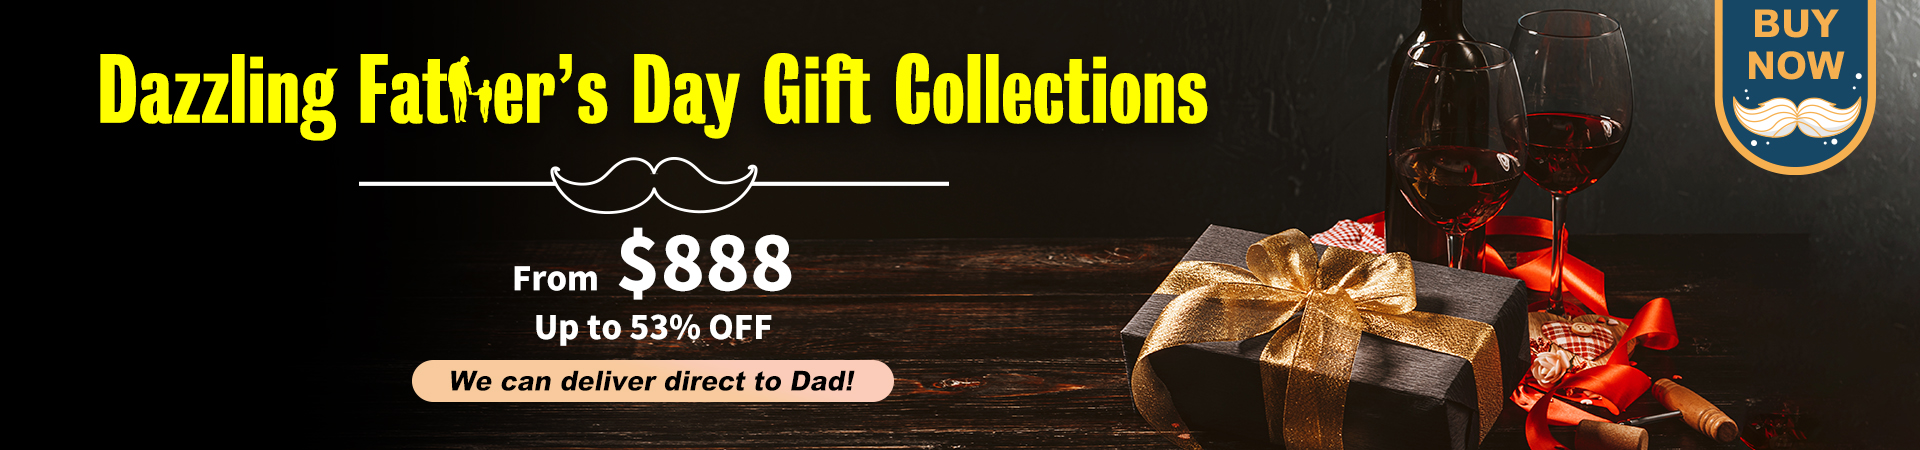 Dazzling Father’s Day Gift Collections